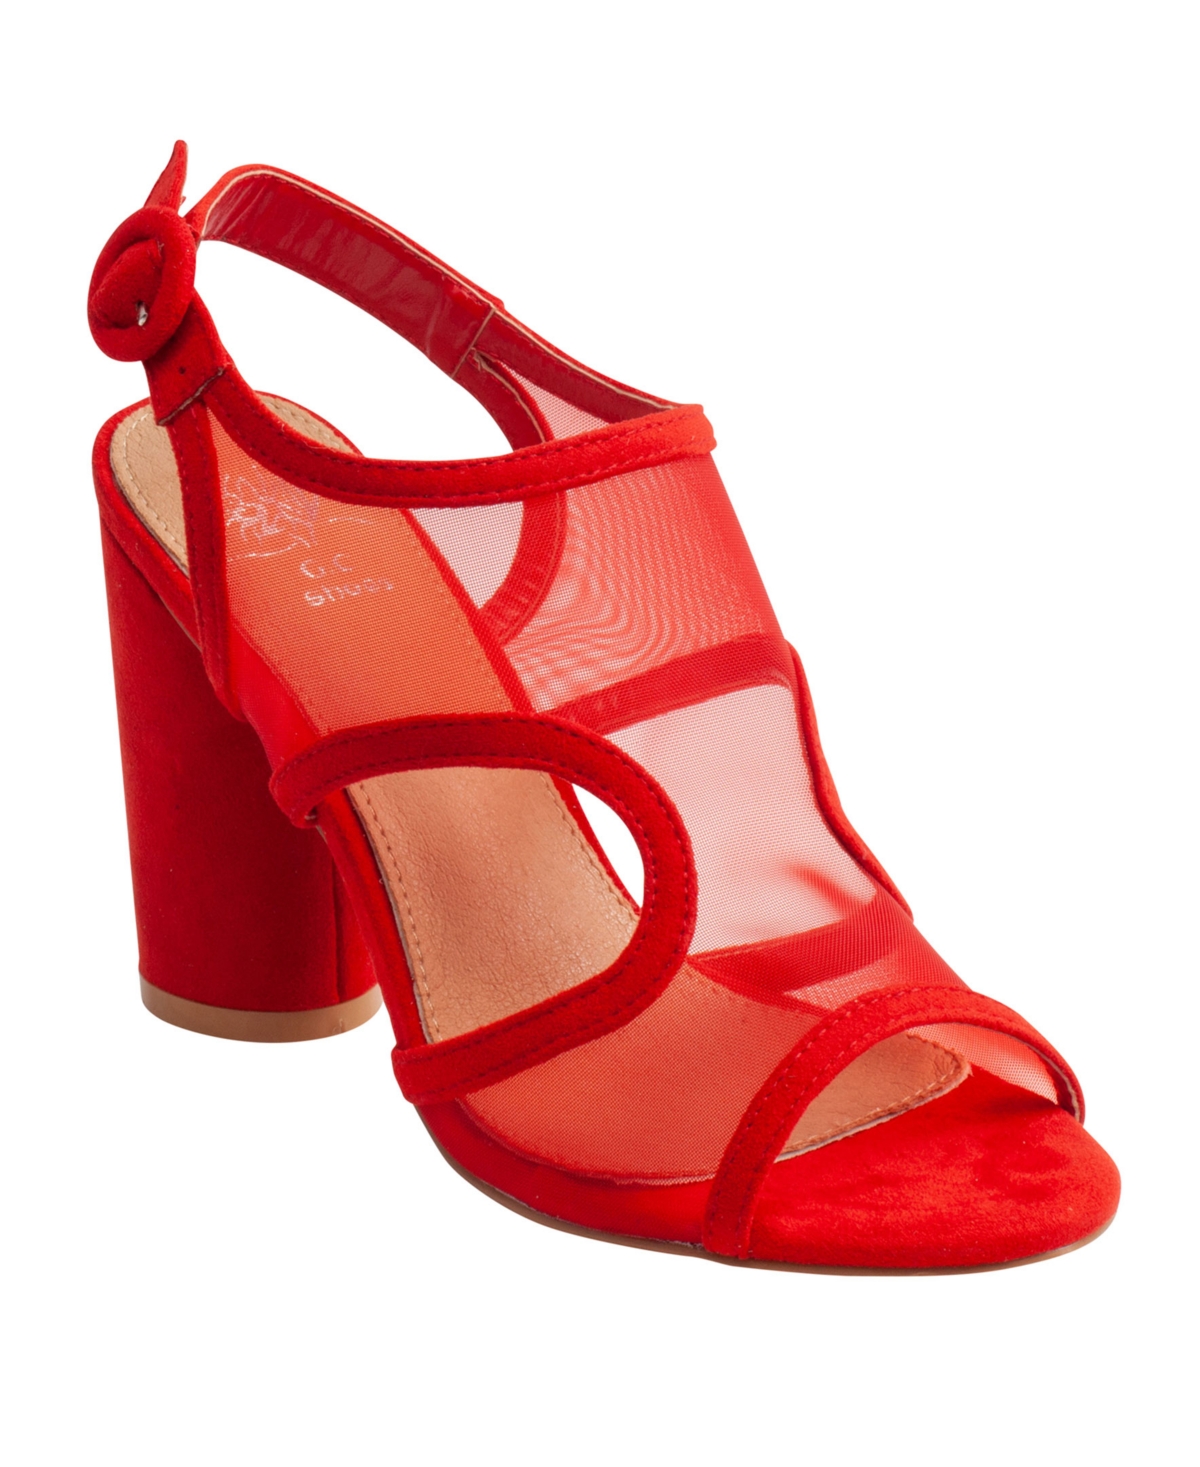 Claire Heeled Sandal - Red